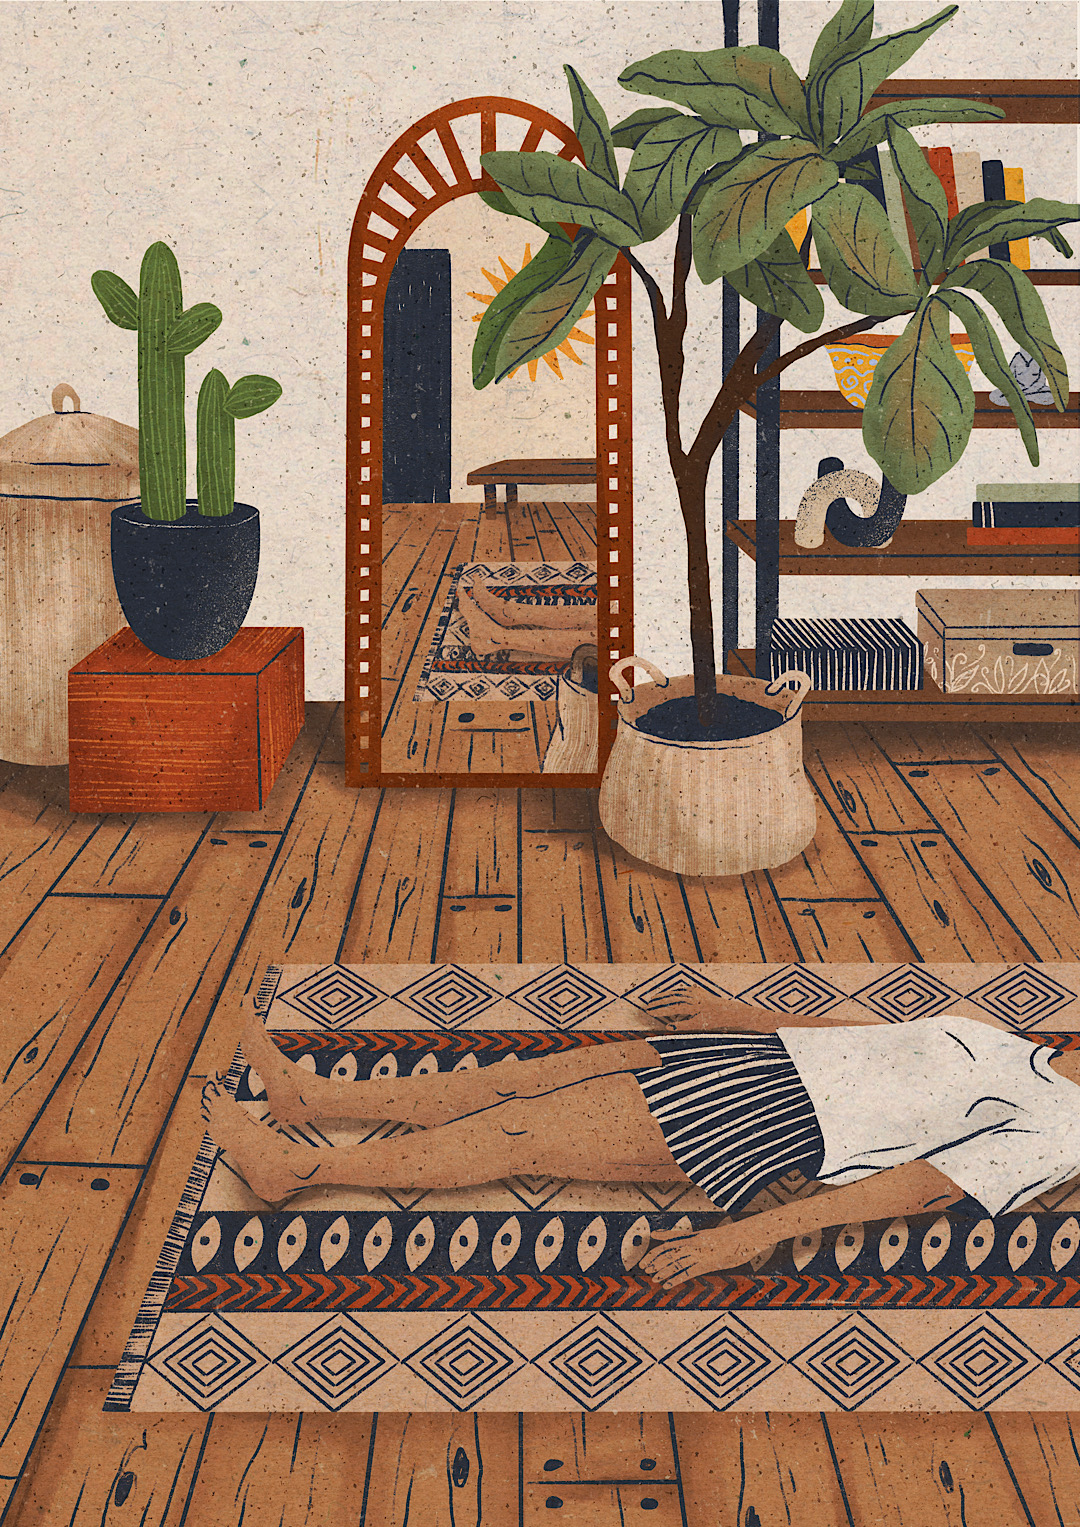 A woman is lying on her floor in a bohemian style room surrounded by plants she is grounded meditating eve pyra